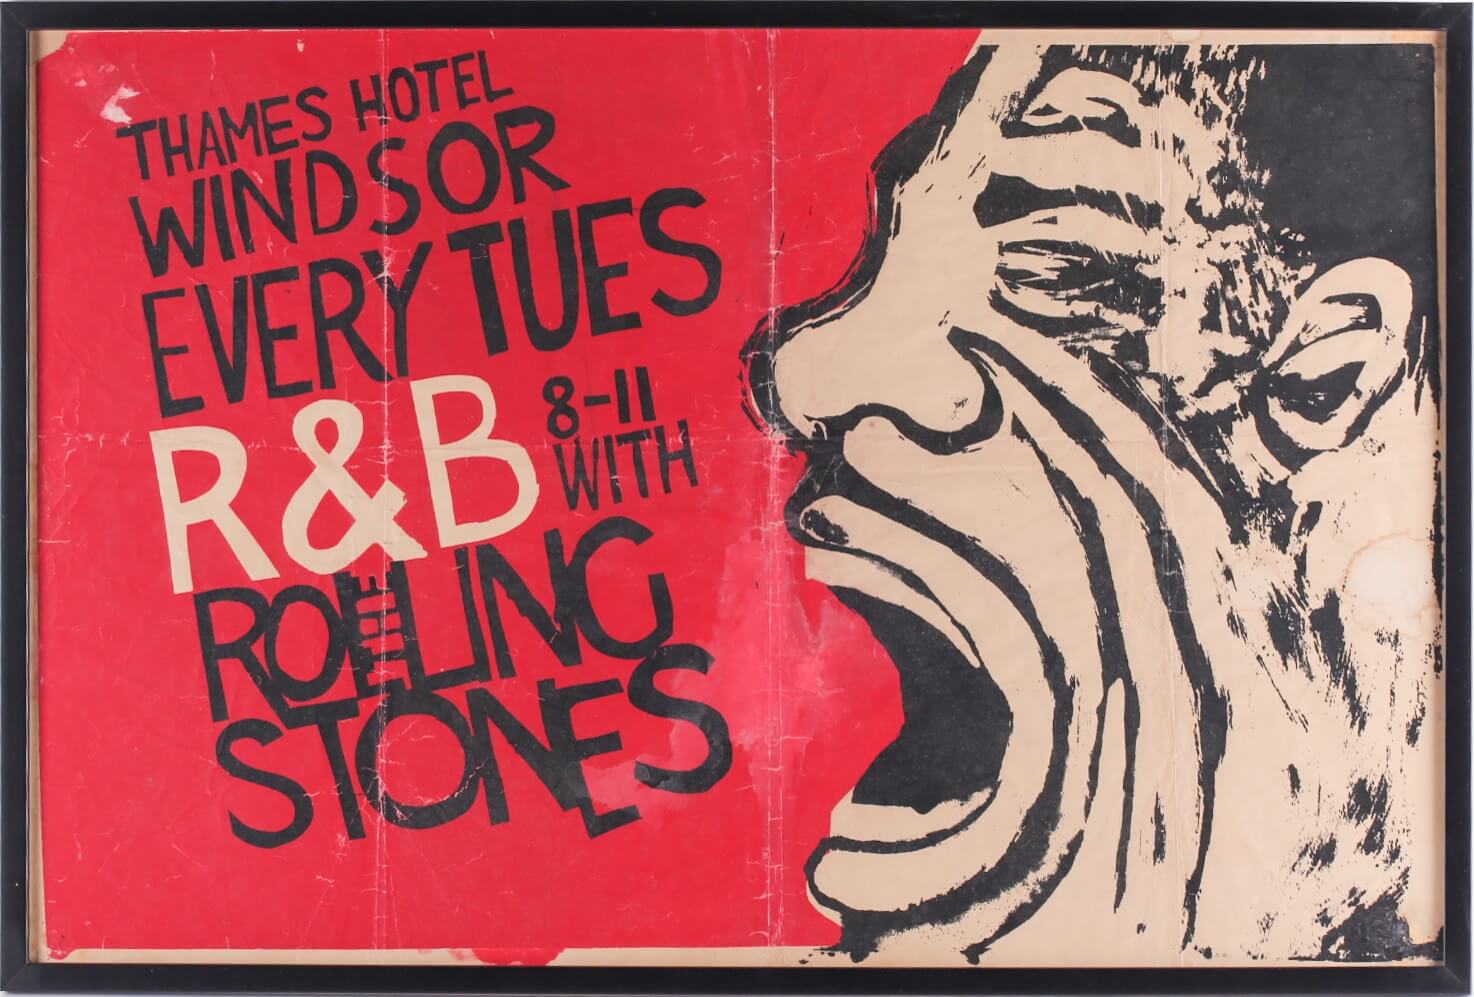 An Early 60's Rolling Stones Promotional Poster